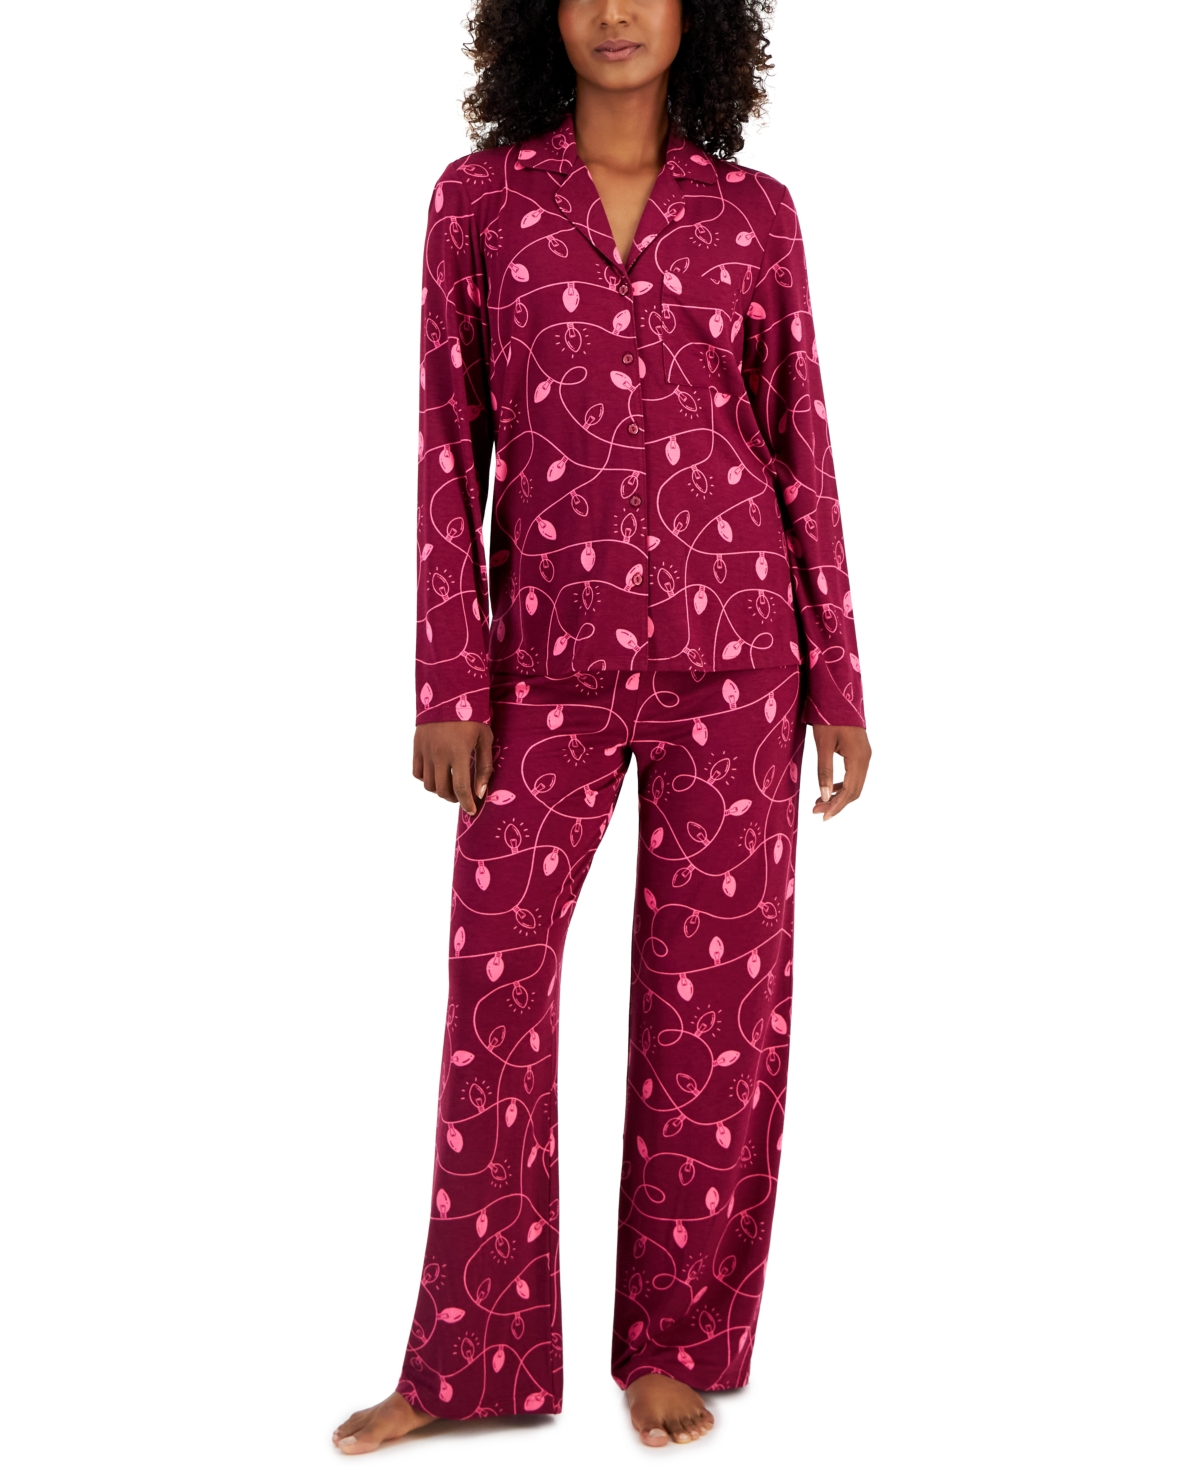 JENNI WOMEN'S SUPERSOFT NOTCHED-COLLAR PAJAMAS SET, CREATED FOR MACY'S